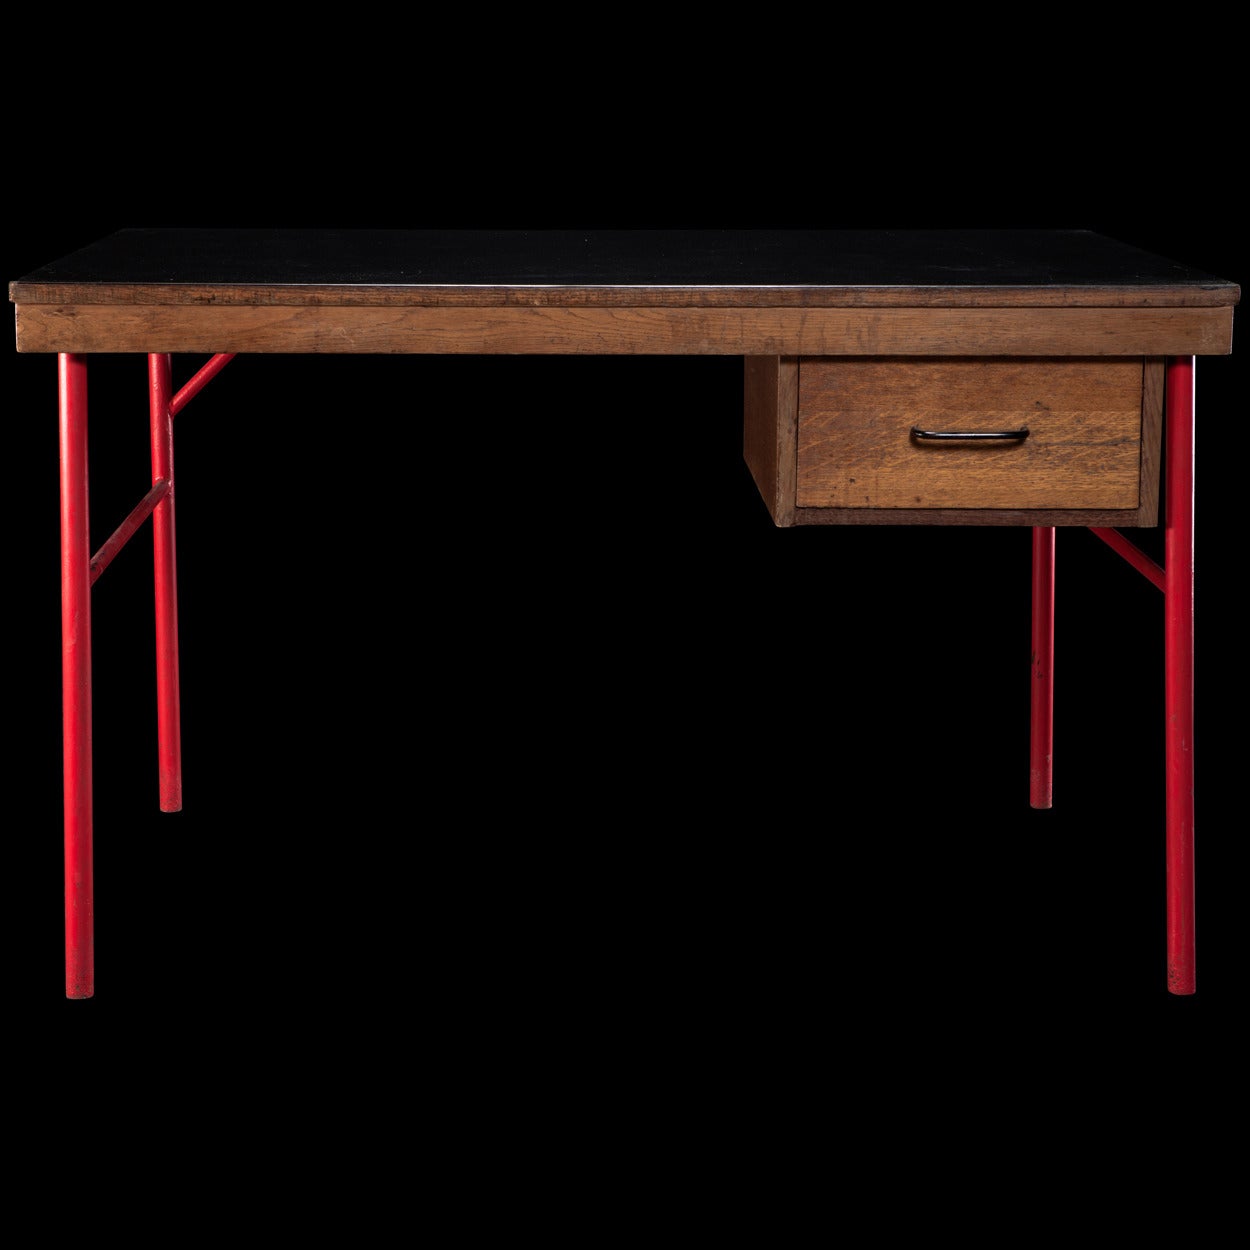 Simple modern desk, solid wood table top with black formica surface on red metal base.

Made in France circa 1960.